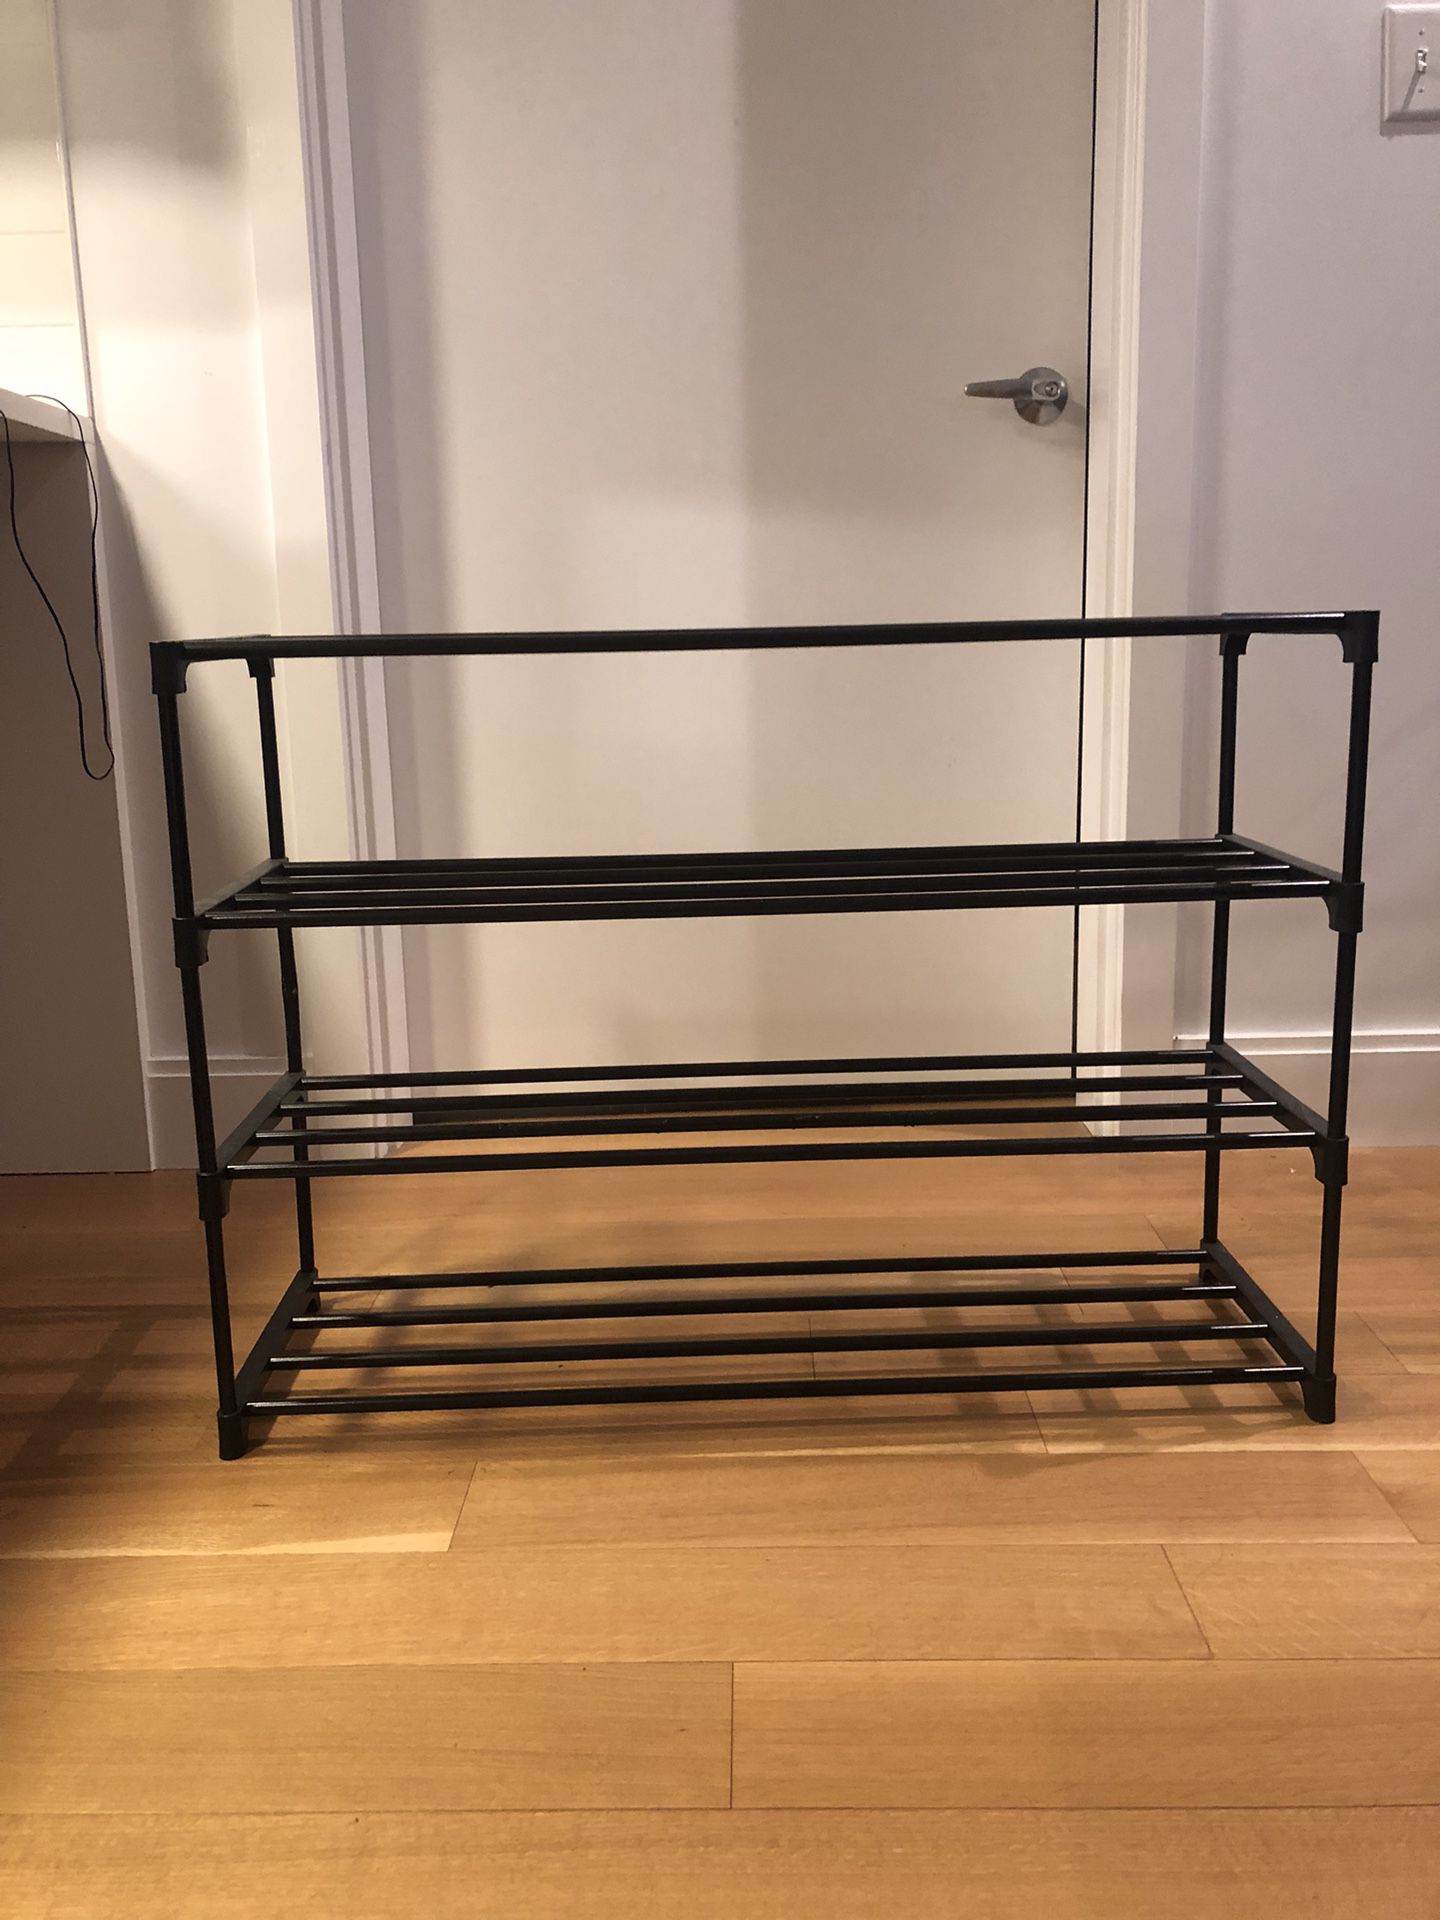 Shoe Rack - Holds 15+ Pairs